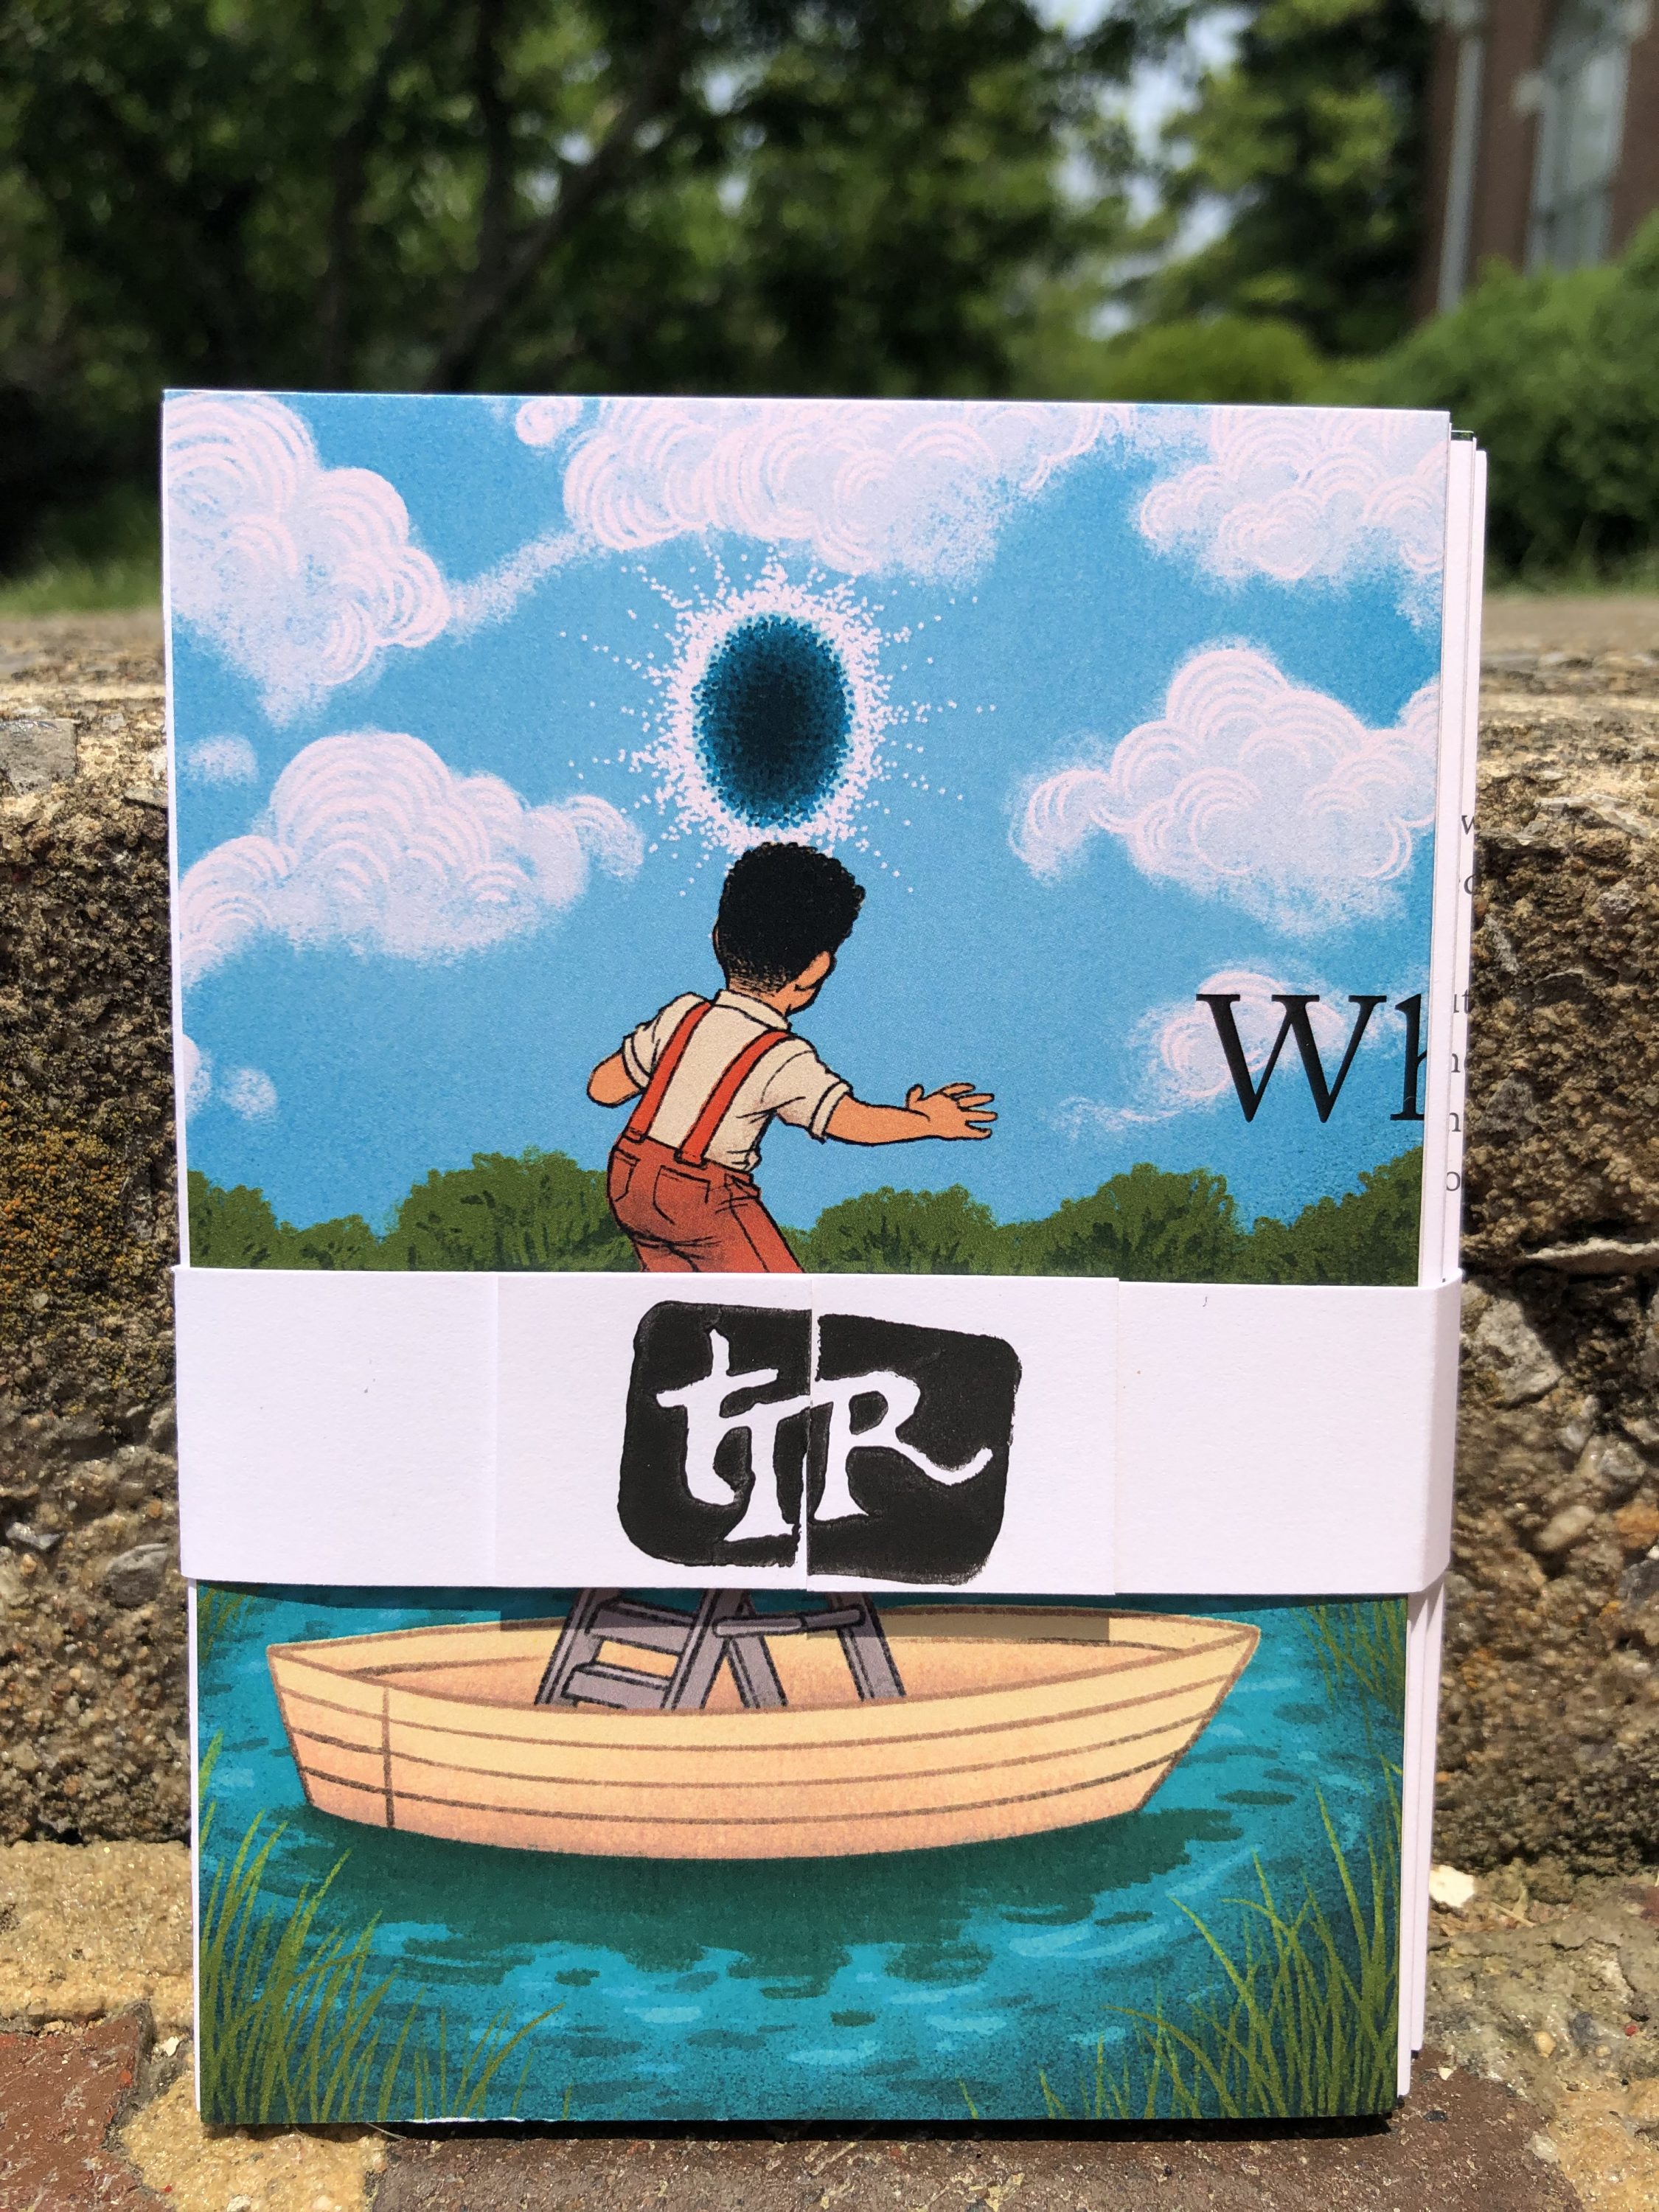 Chapbook cover features boy balanced on stepladder in boat reaching toward a dark mirage in the blue sky above the treeline